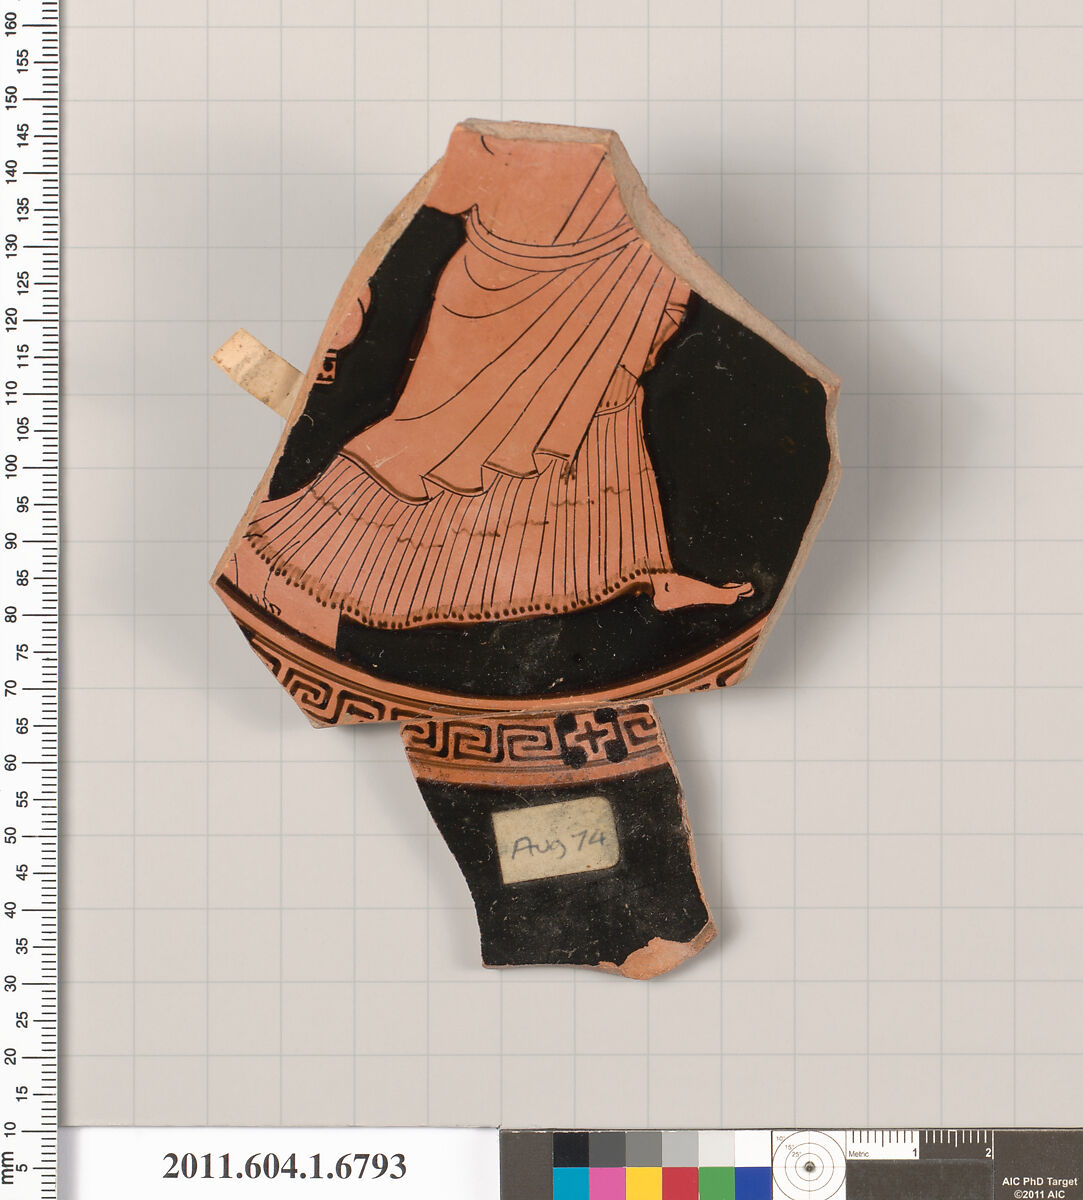 Terracotta fragment of a kylix (drinking cup), Attributed to the Briseis Painter [DvB], Terracotta, Greek, Attic 